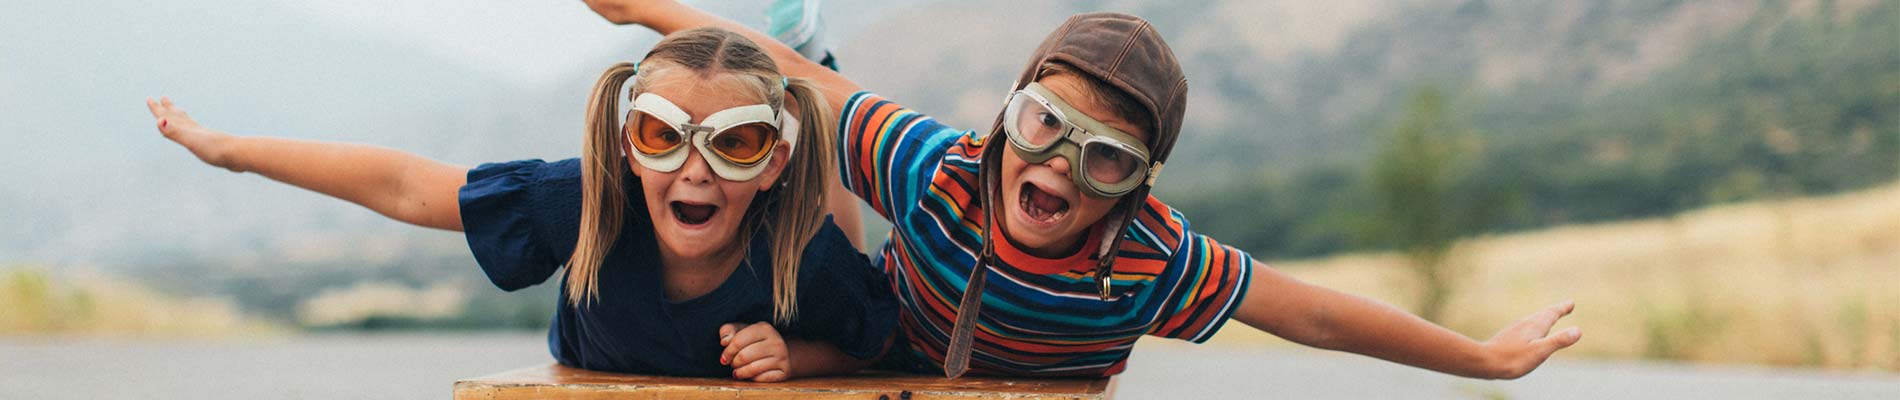 Two kids wearing goggles pretending to be airplanes